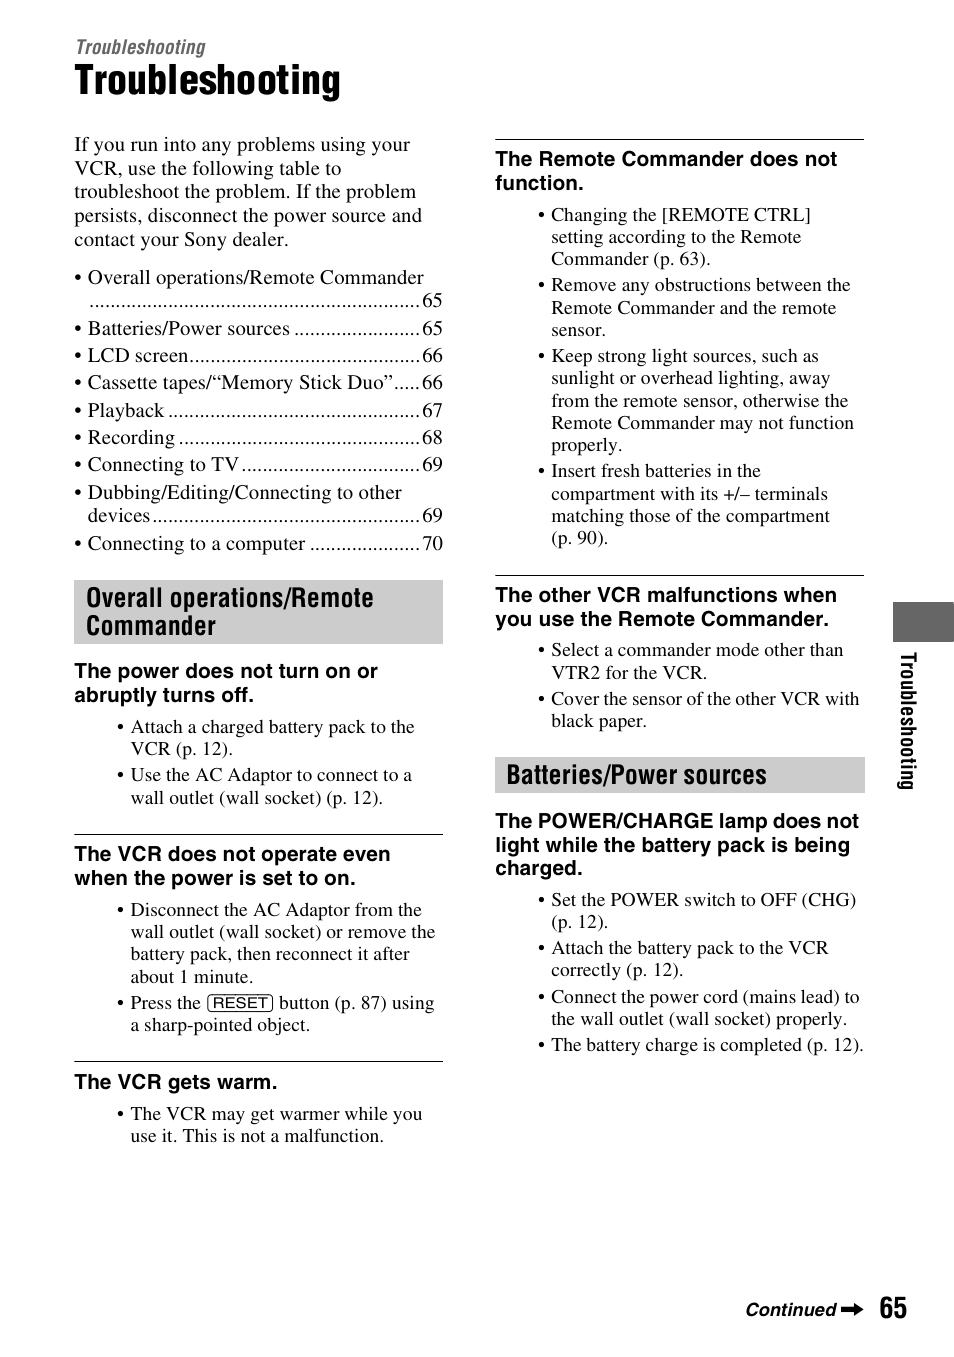 Troubleshooting | Sony GV-HD700 User Manual | Page 65 / 108